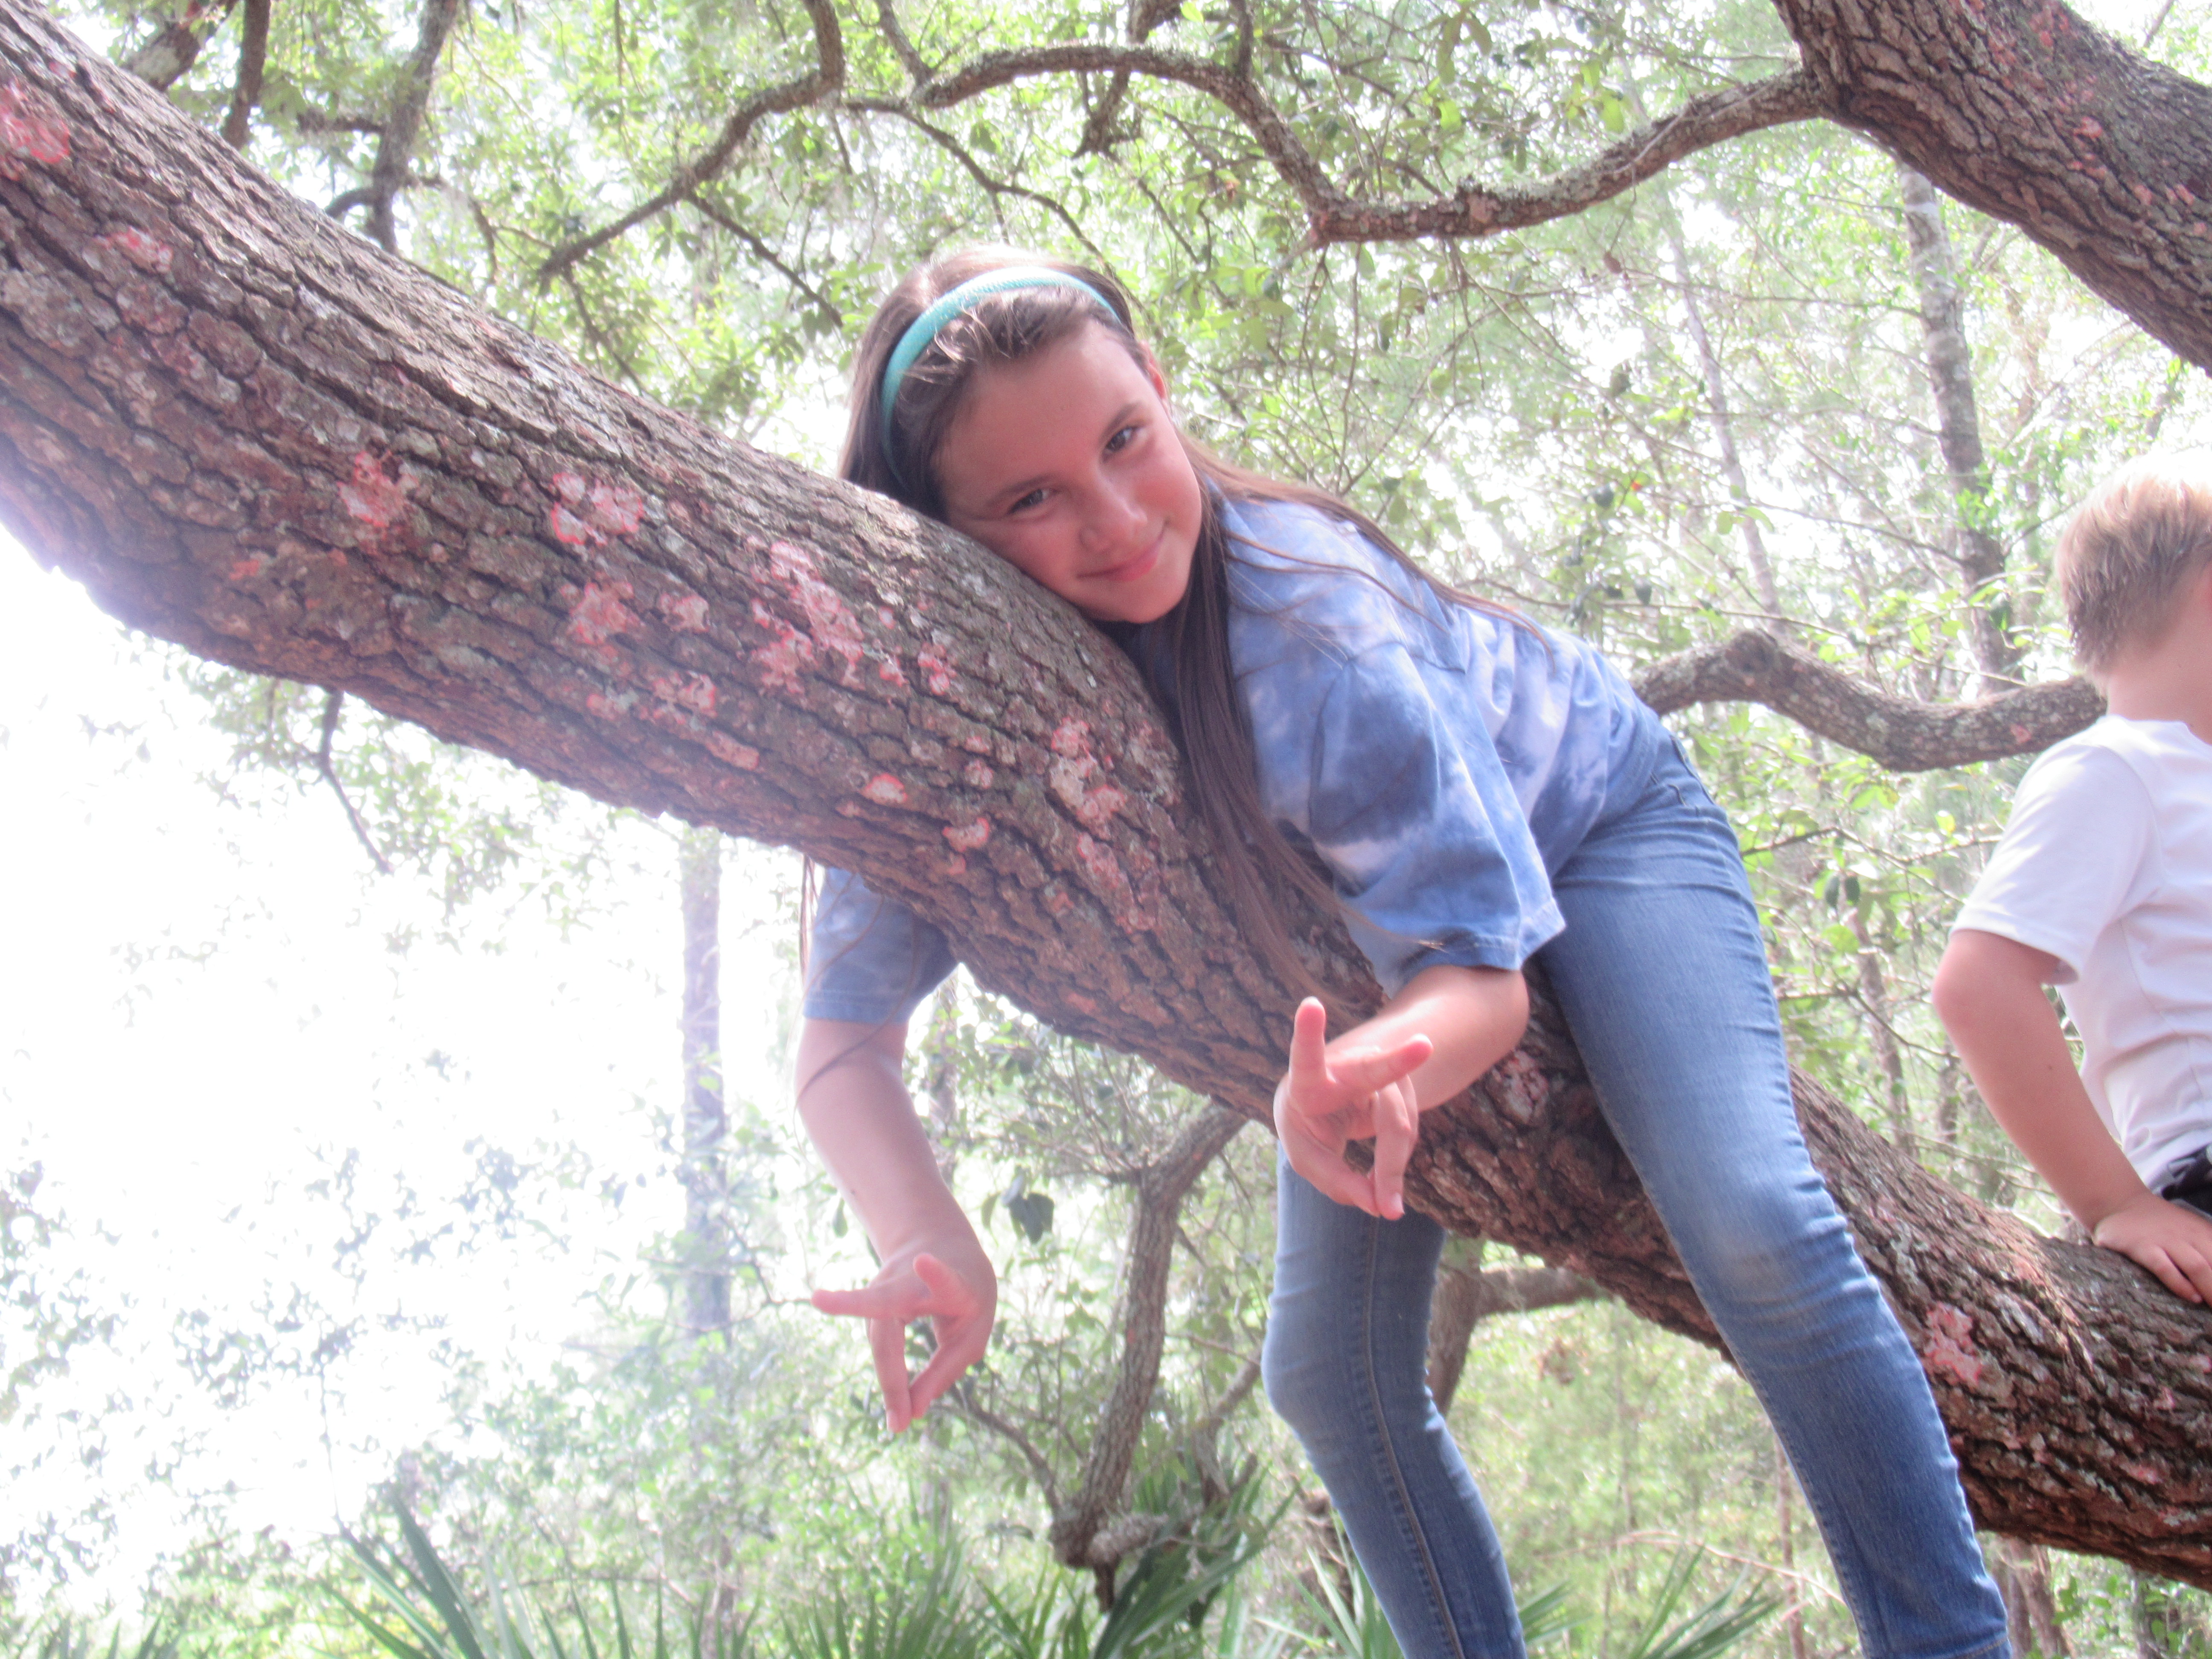 Girl laying on tree branch, smiling, giving peace signs with her hands